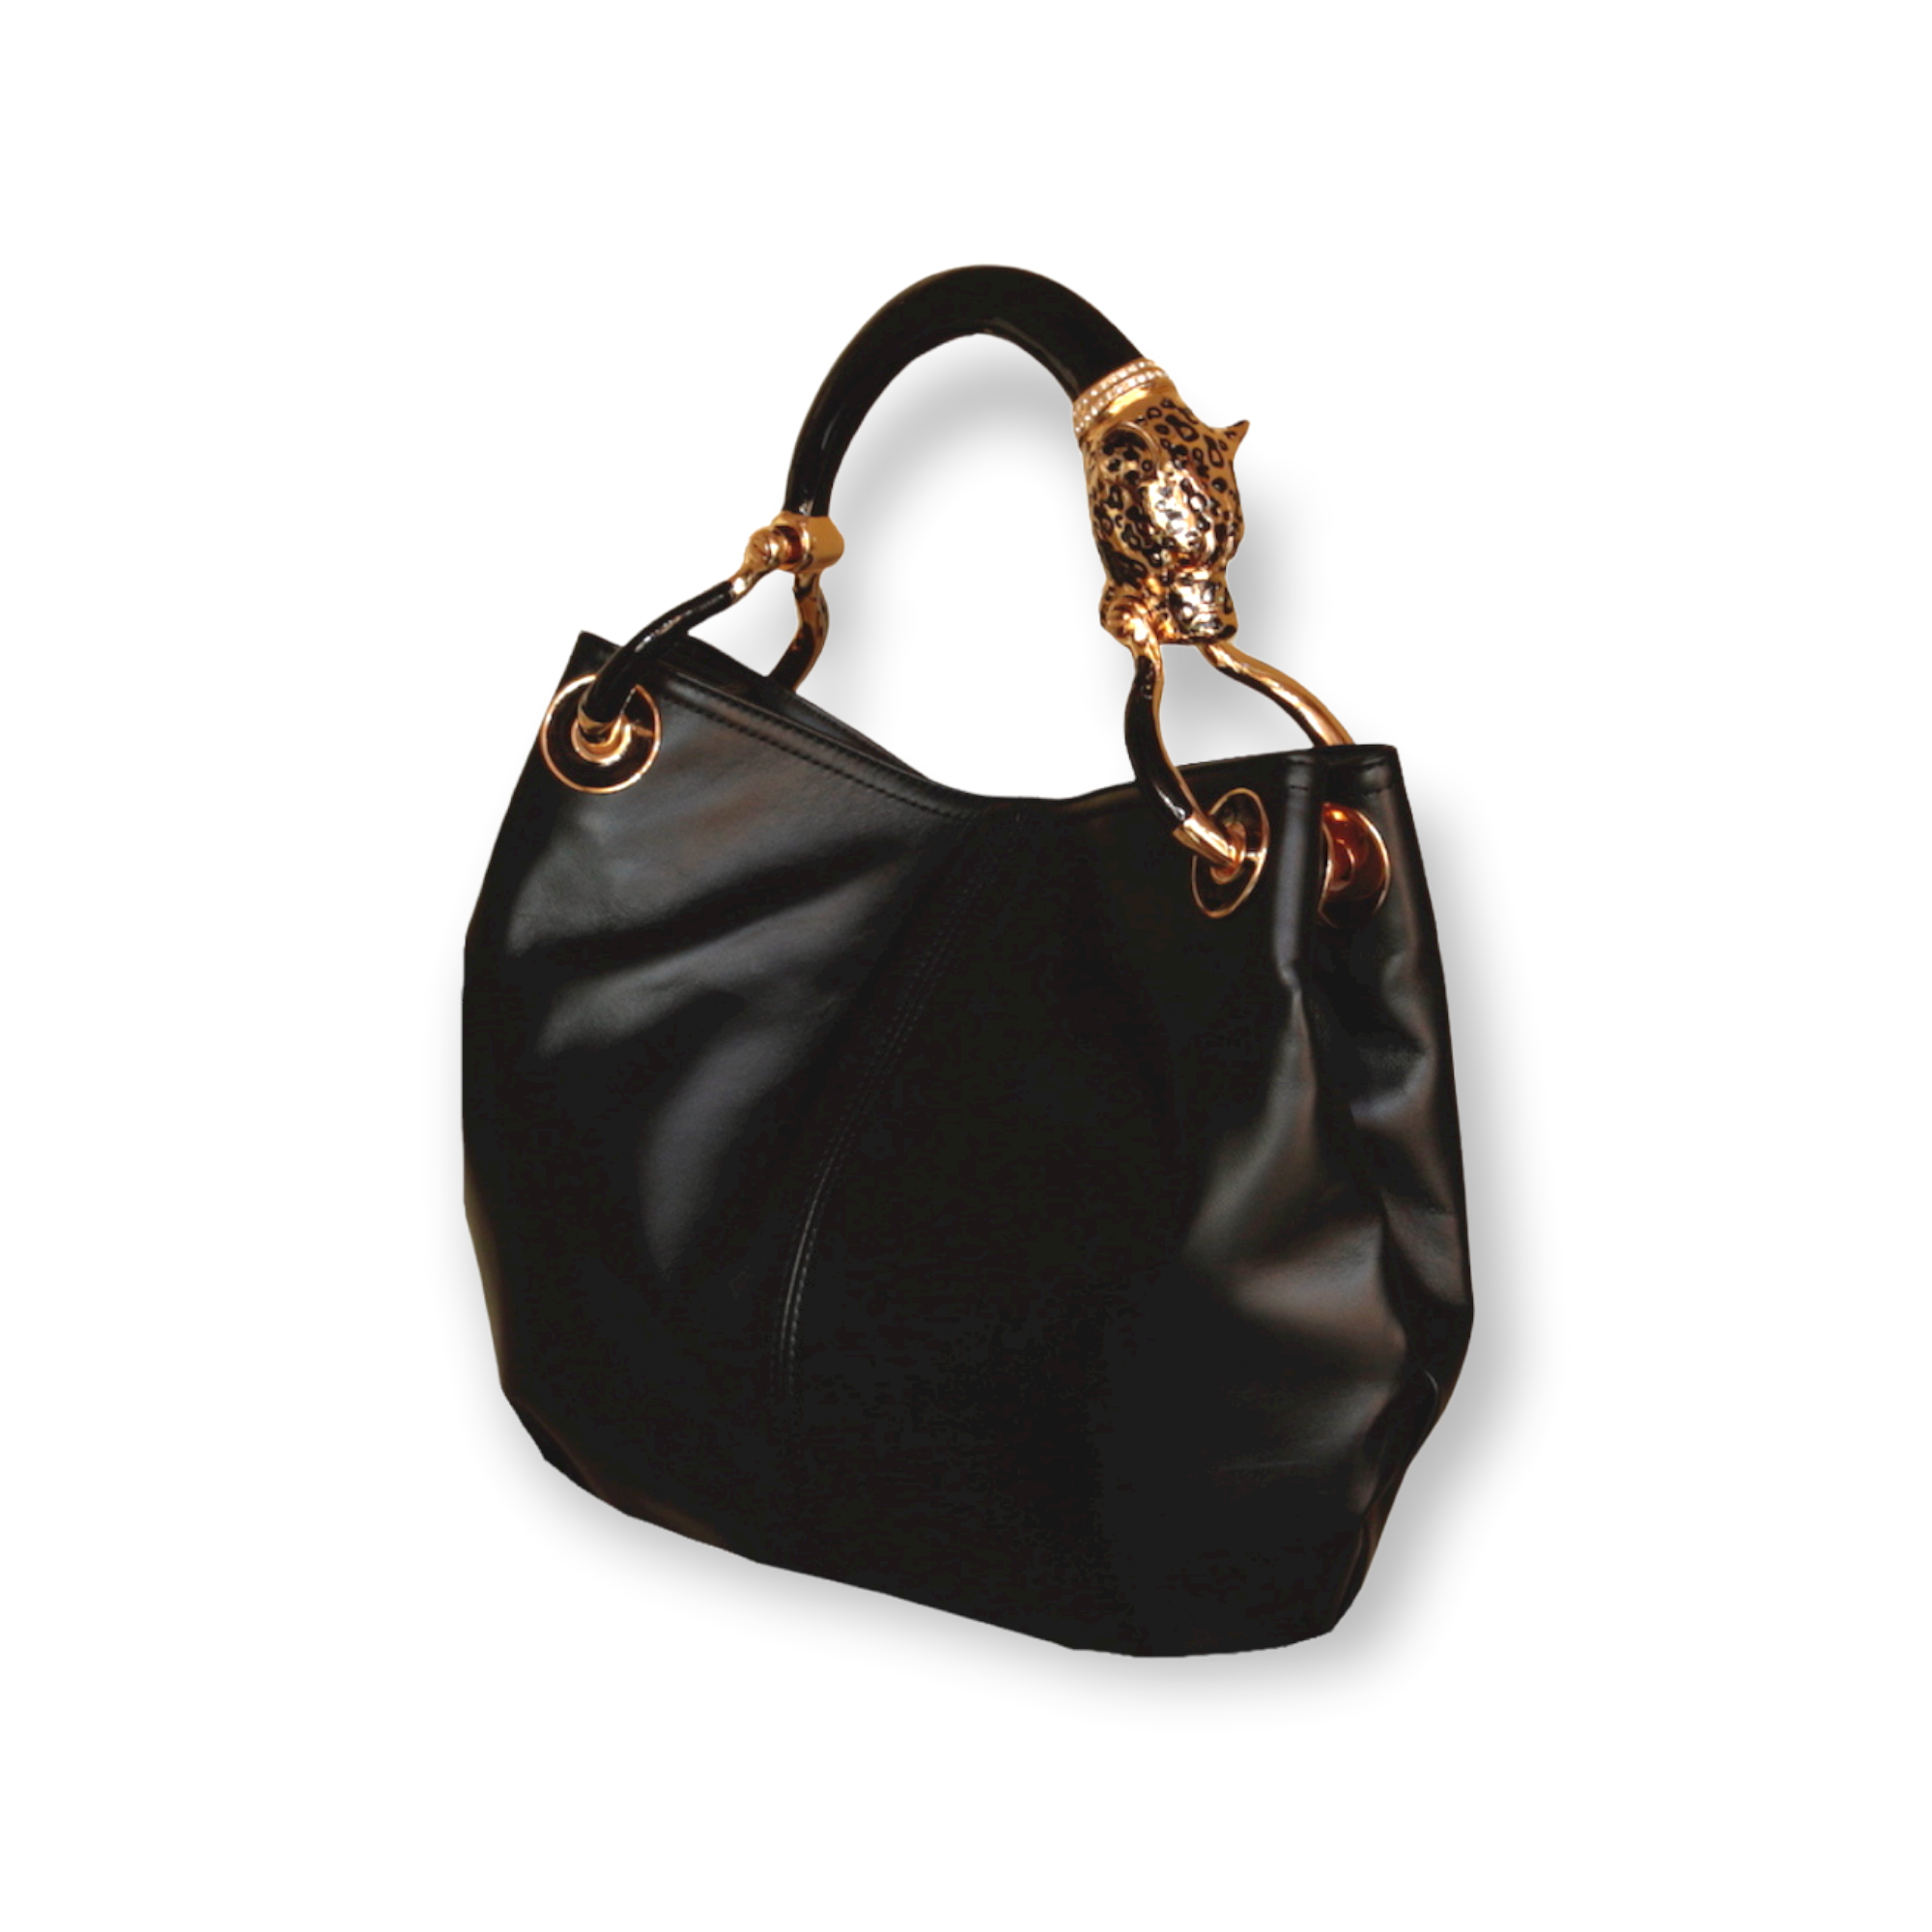 Precious handbag made in Italy in vegan leather with fine accessories made in polychrome enamels and exclusive